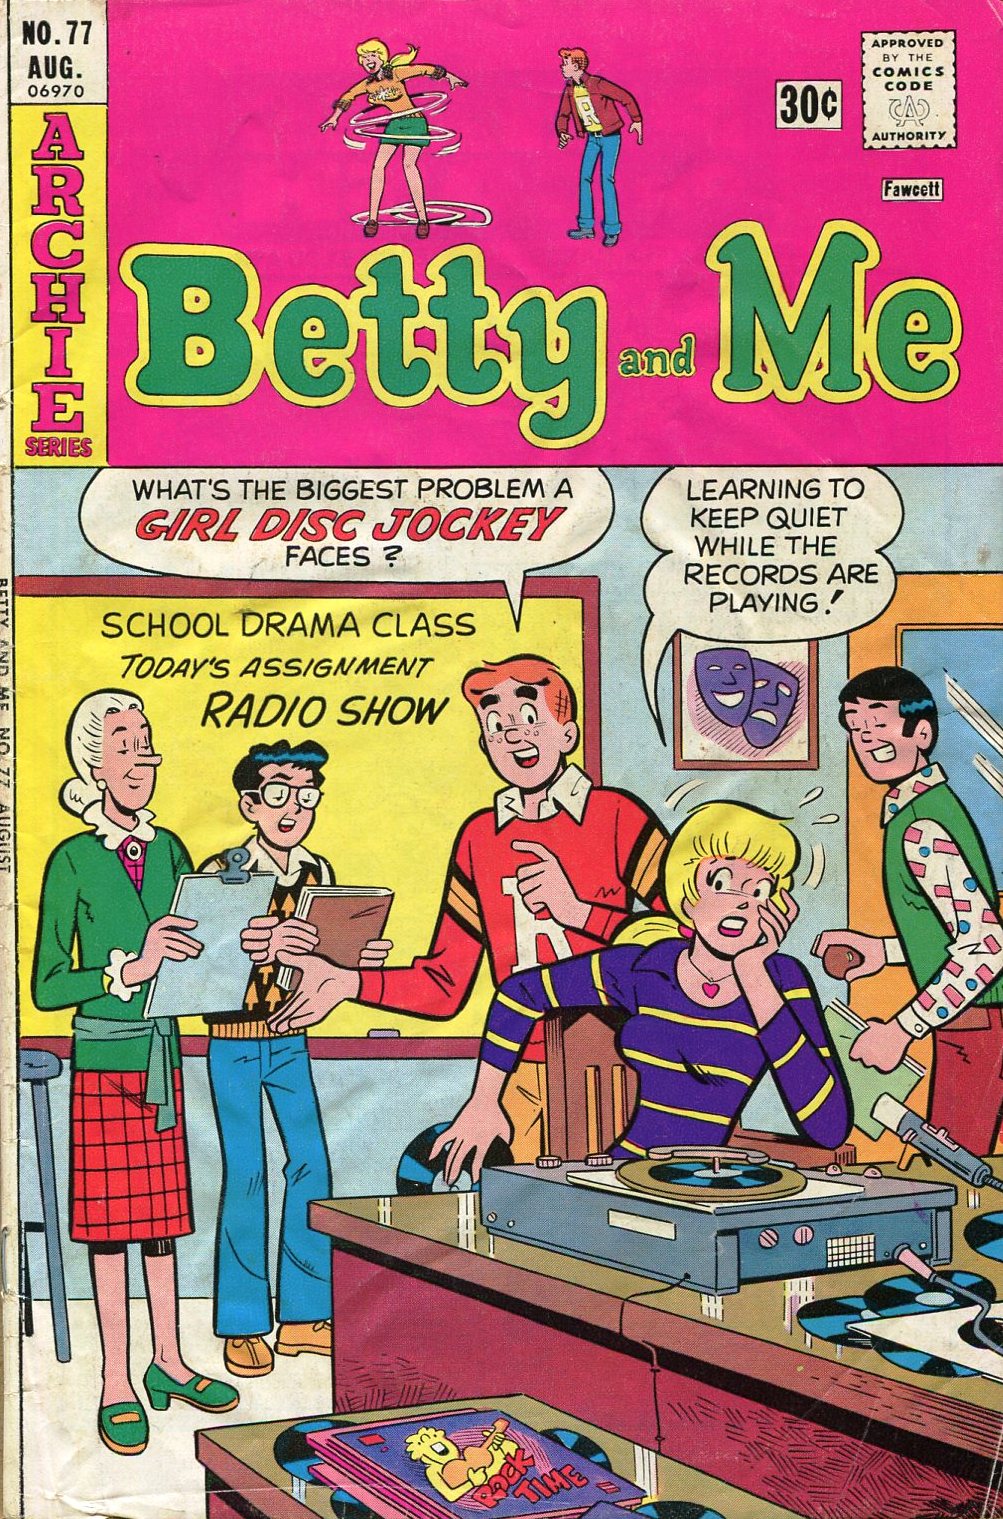 Read online Betty and Me comic -  Issue #77 - 1